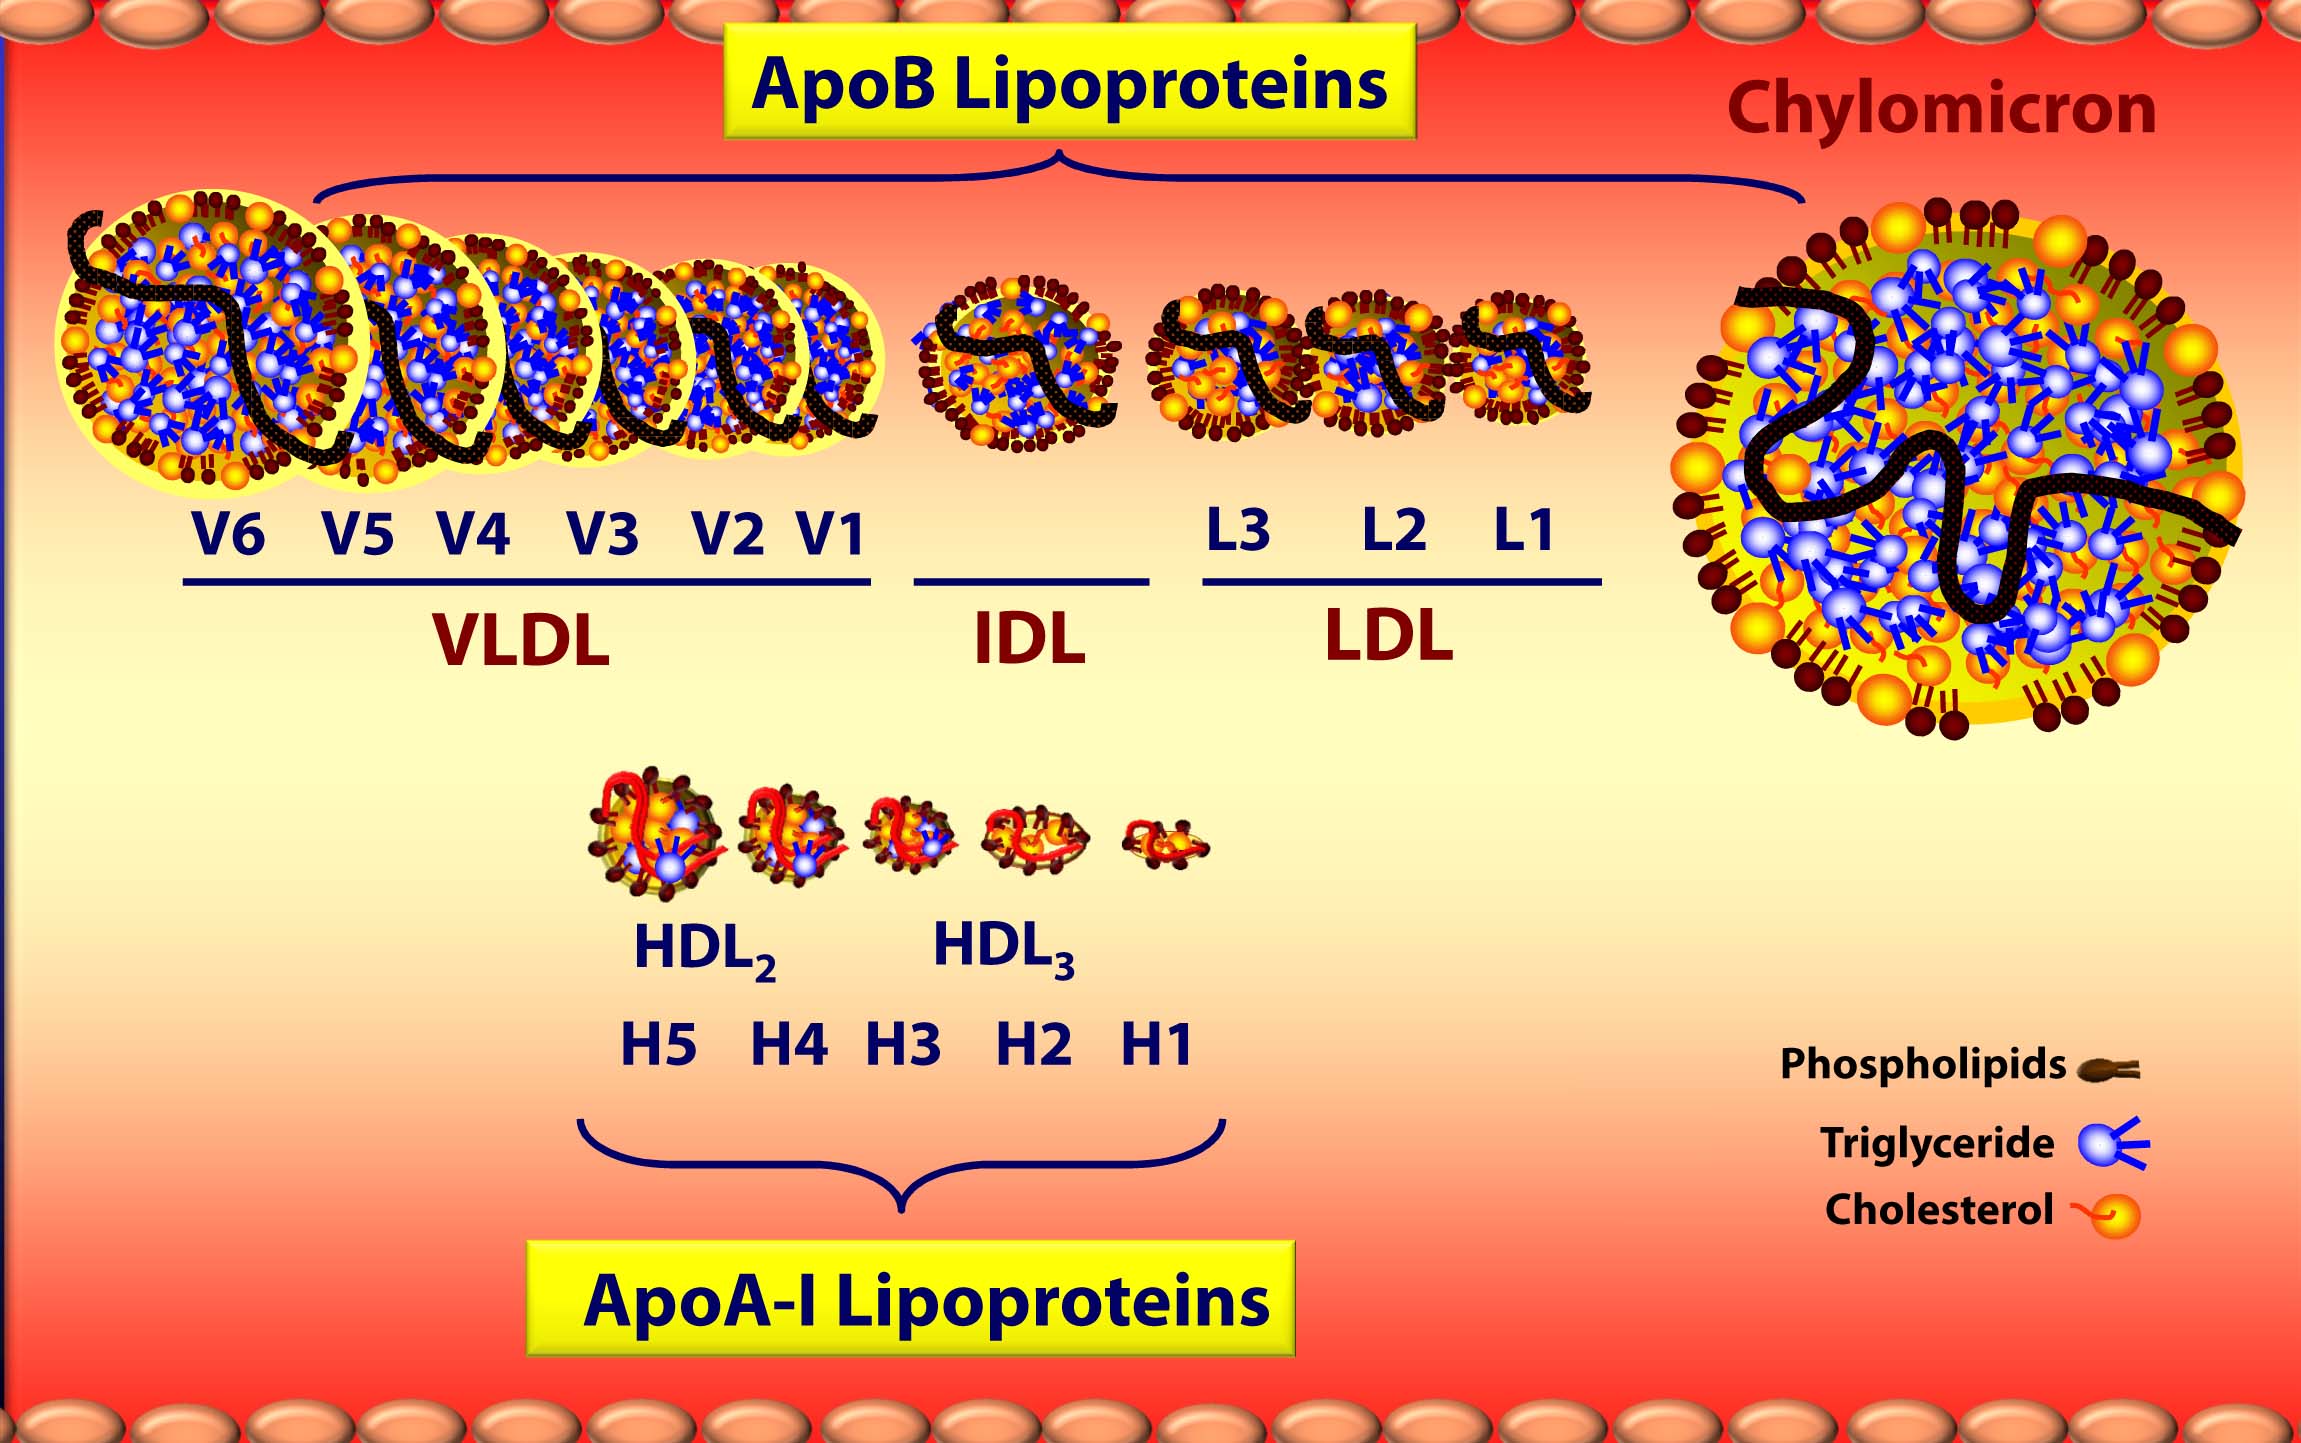 What is VLDL cholesterol?